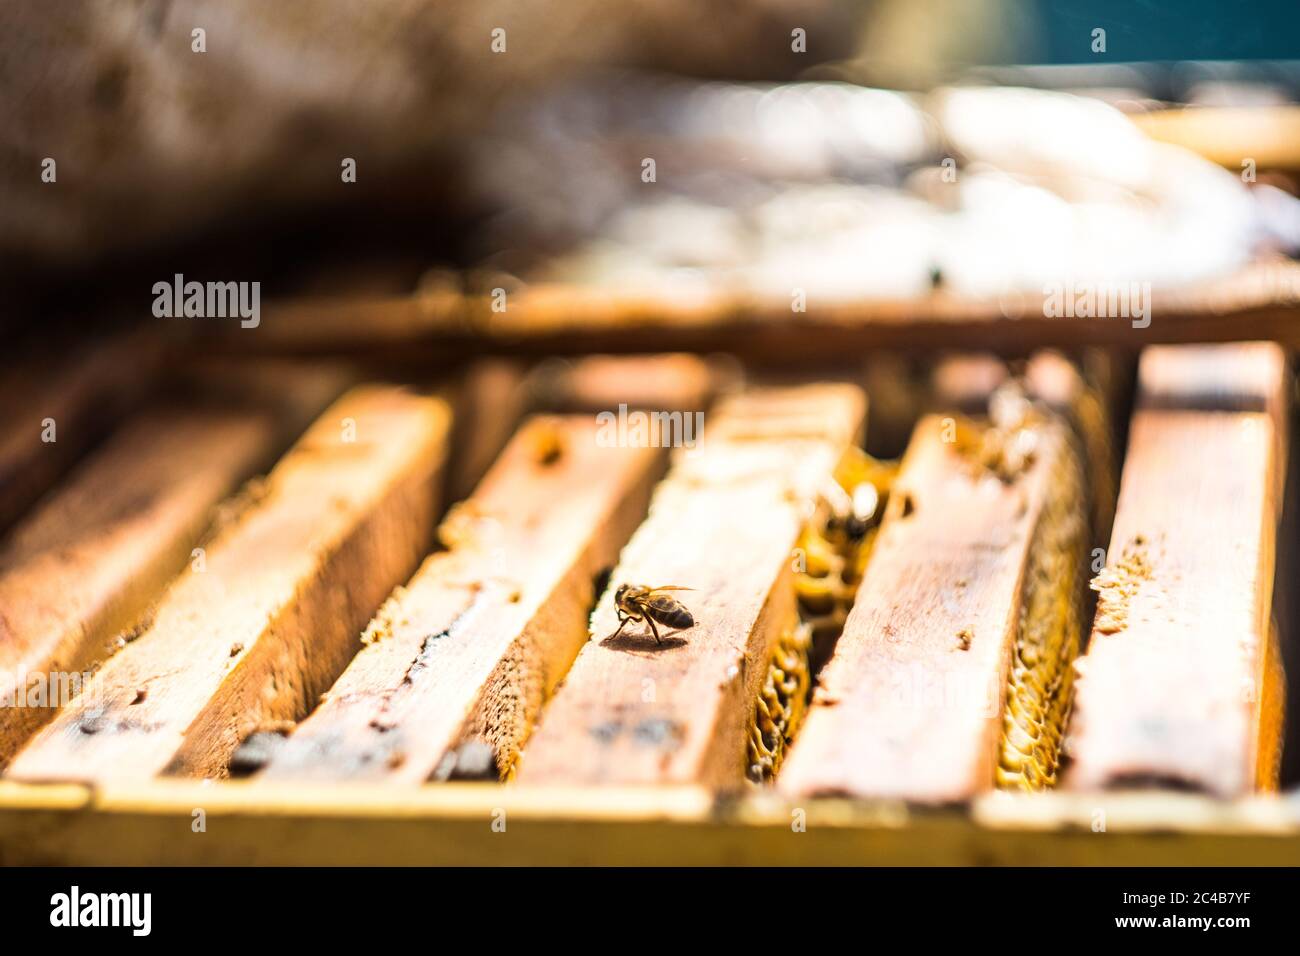 A honey bee on the wooden beehive  Stock Photo